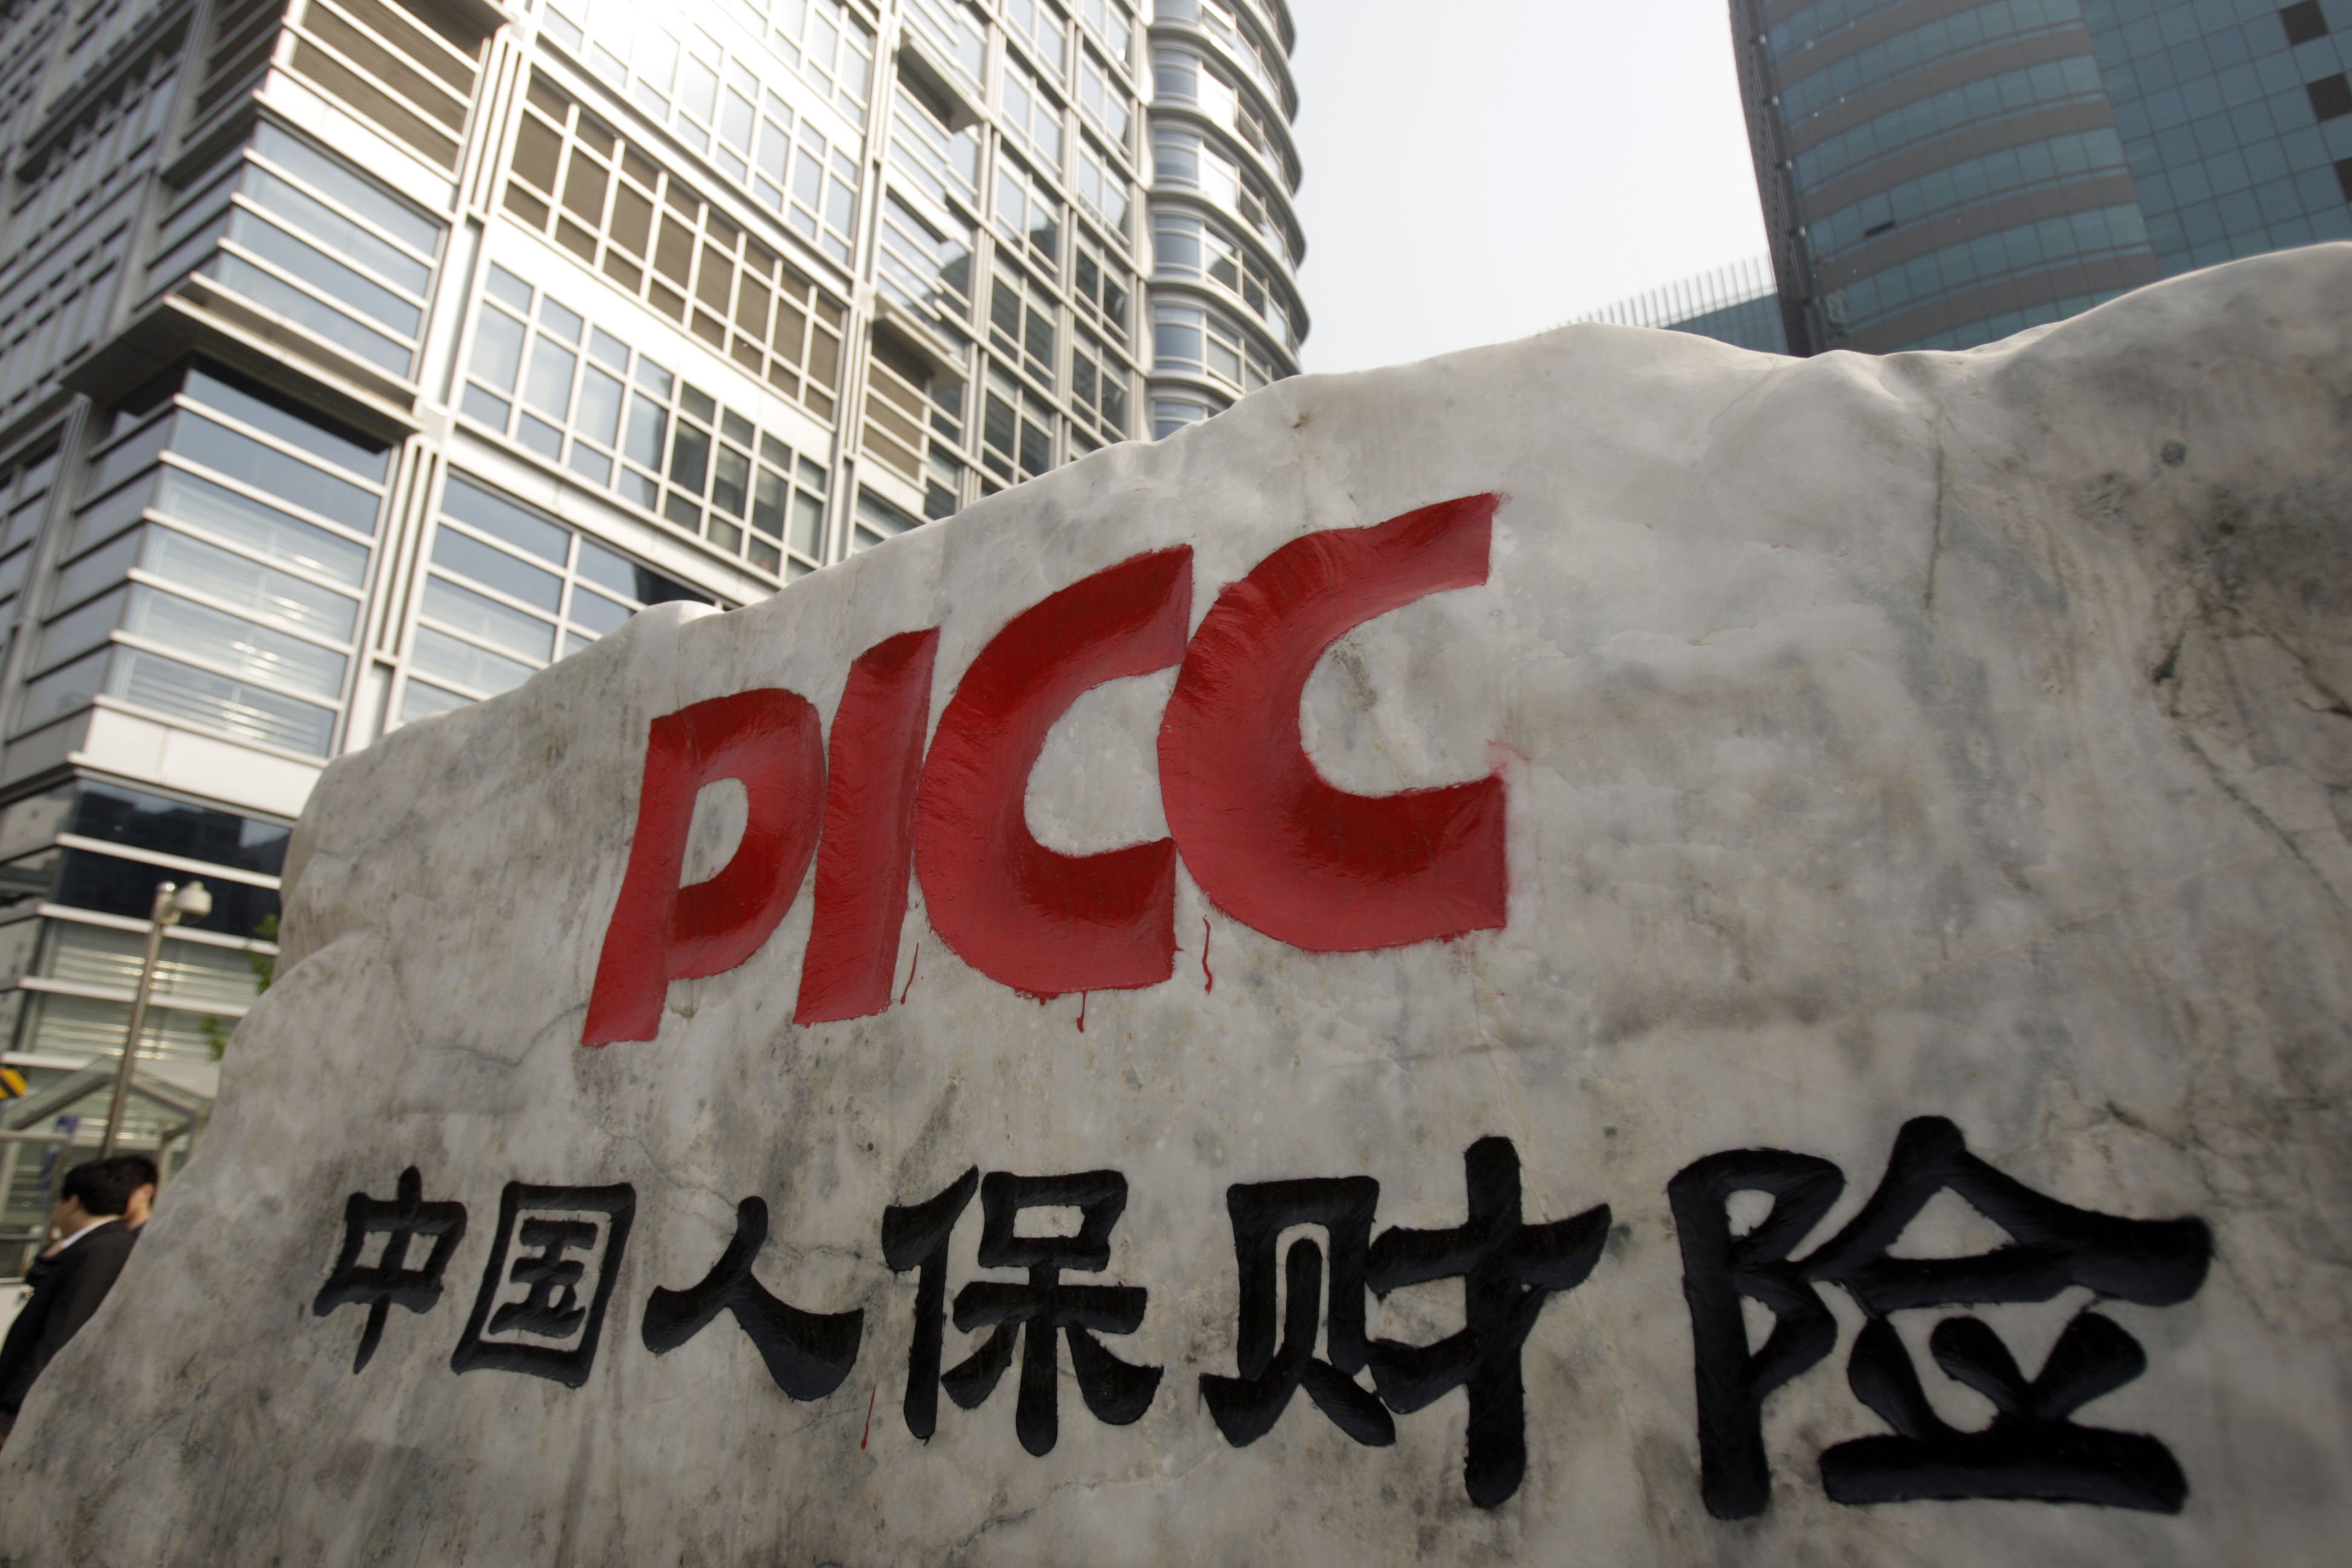 The PICC Property and Casualty Co. logo is seen etched into a stone outside one of the company's branches in Beijing, China, on Wednesday, April 16, 2008. PICC Property & Casualty Co., China's largest non-life insurer, fell the most in a month in Hong Kong trading after posting a second-half loss on higher expenses. Photographer: Nelson Ching/Bloomberg News